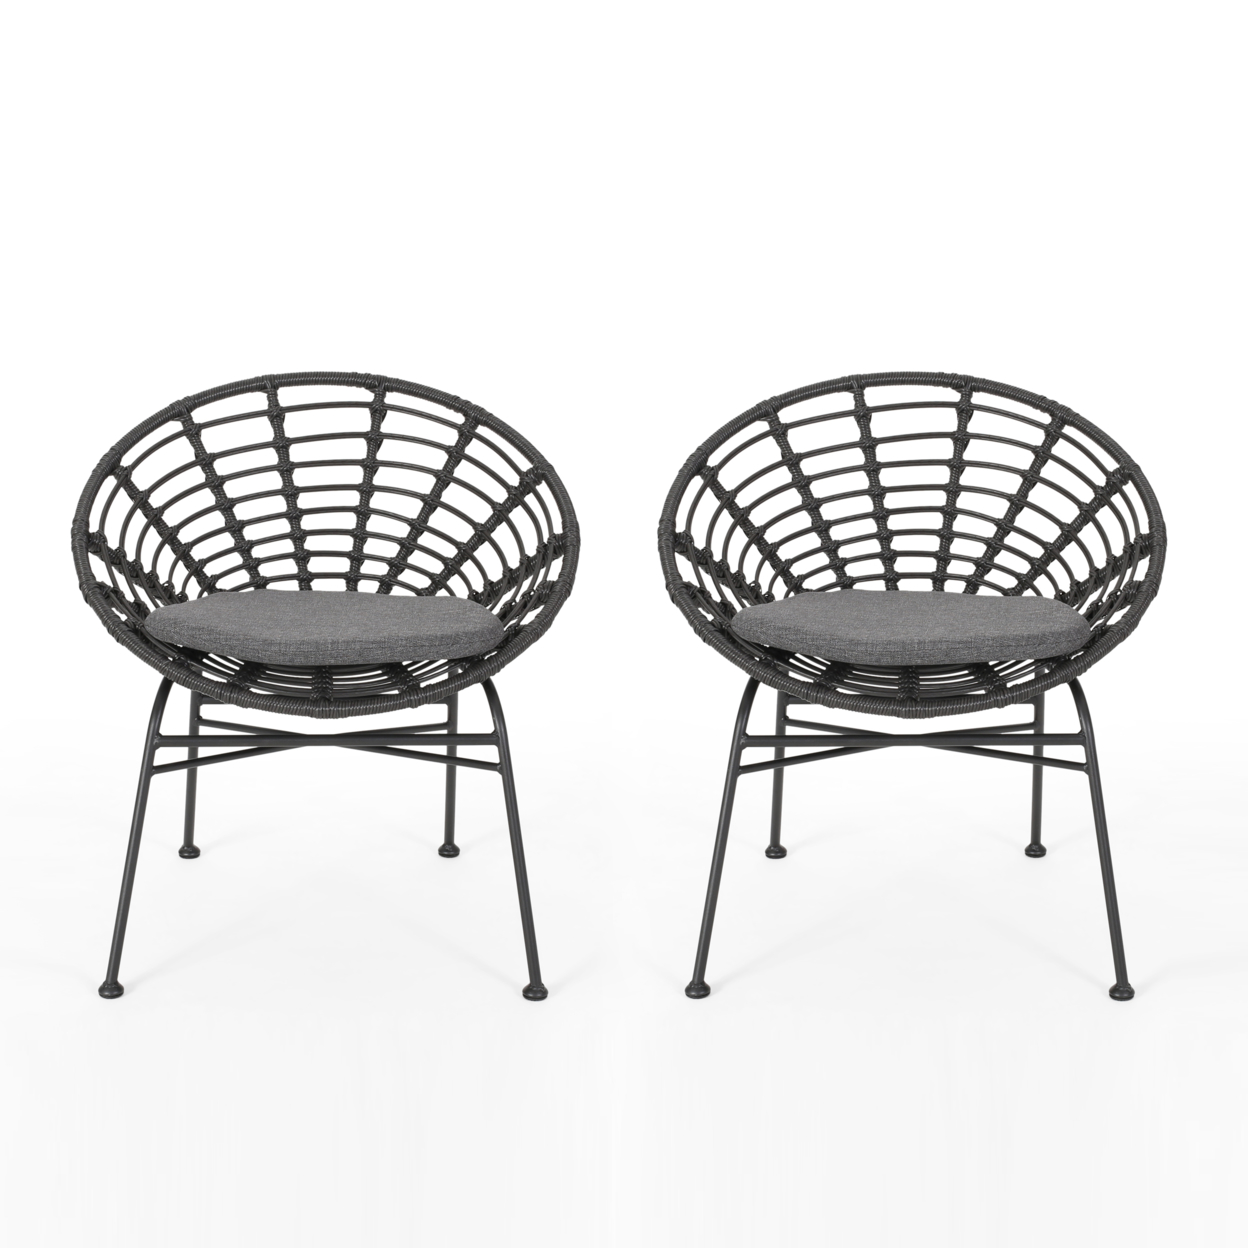 Barbie Outdoor Wicker Dining Chair With Cushion (Set Of 2) - Gray, Black, Dark Gray